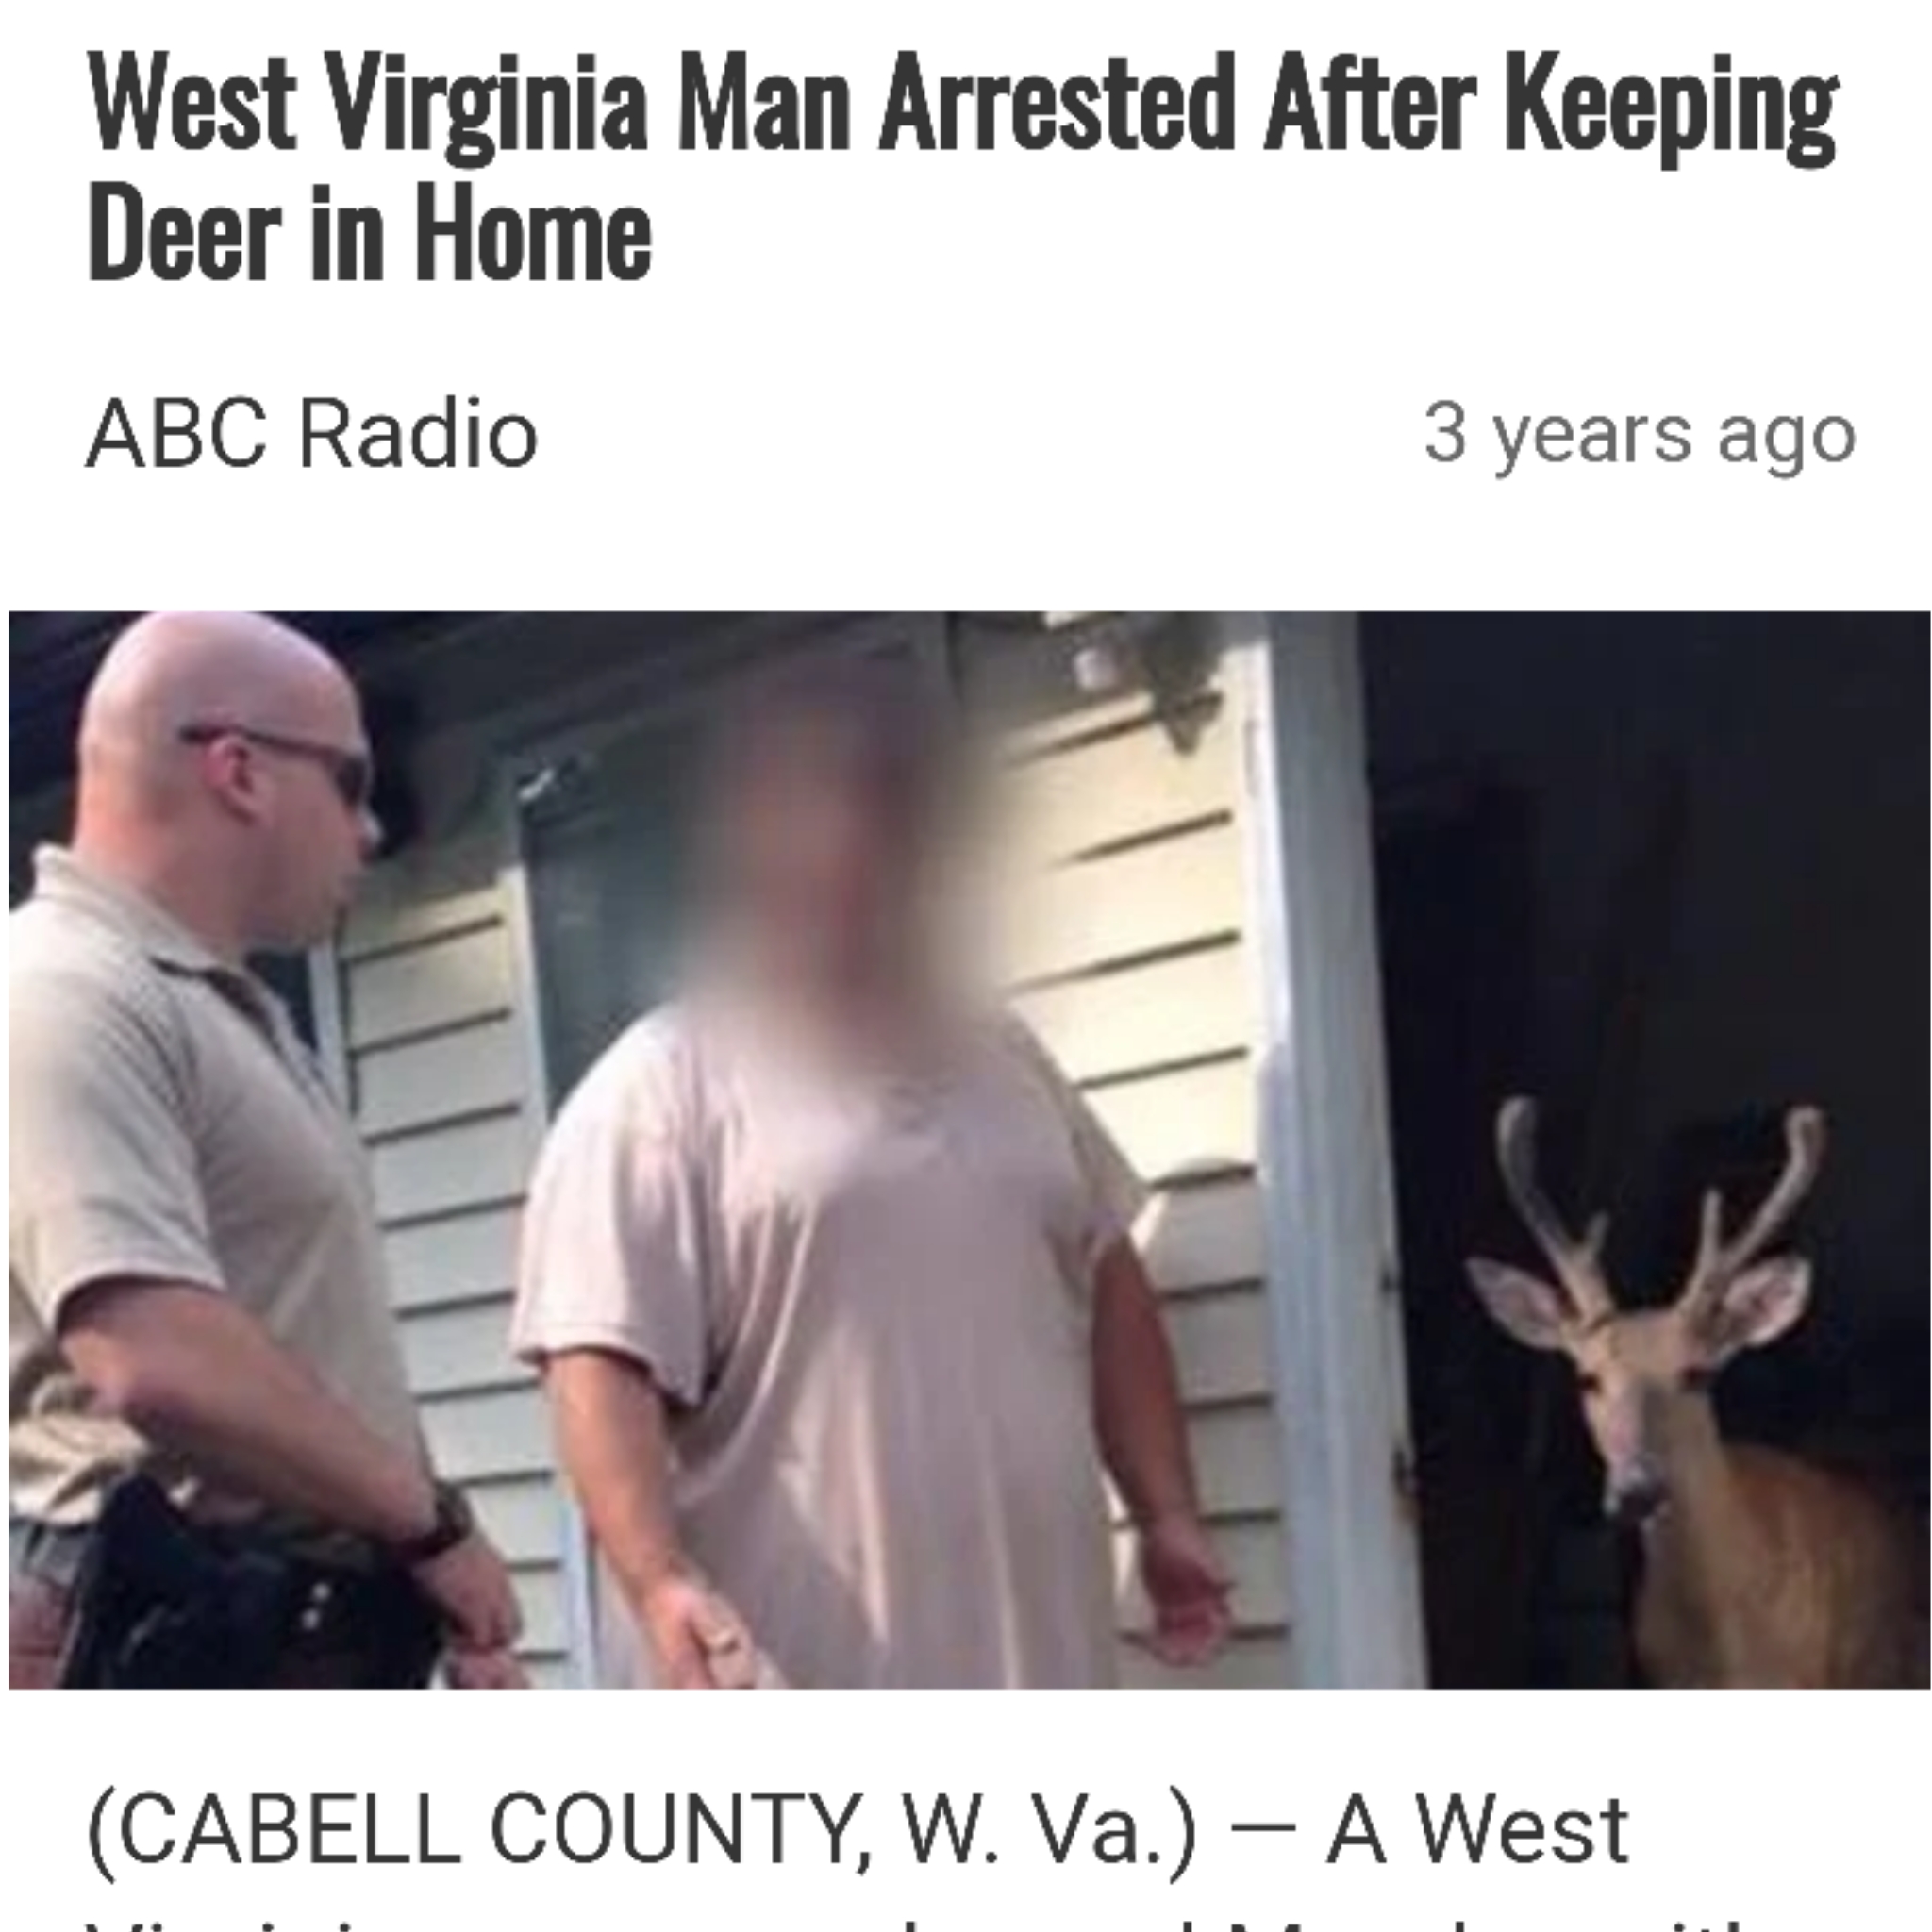 man arrested for keeping deer in home - West Virginia Man Arrested After Keeping Deer in Home Abc Radio 3 years ago Cabell County, W. Va. A West